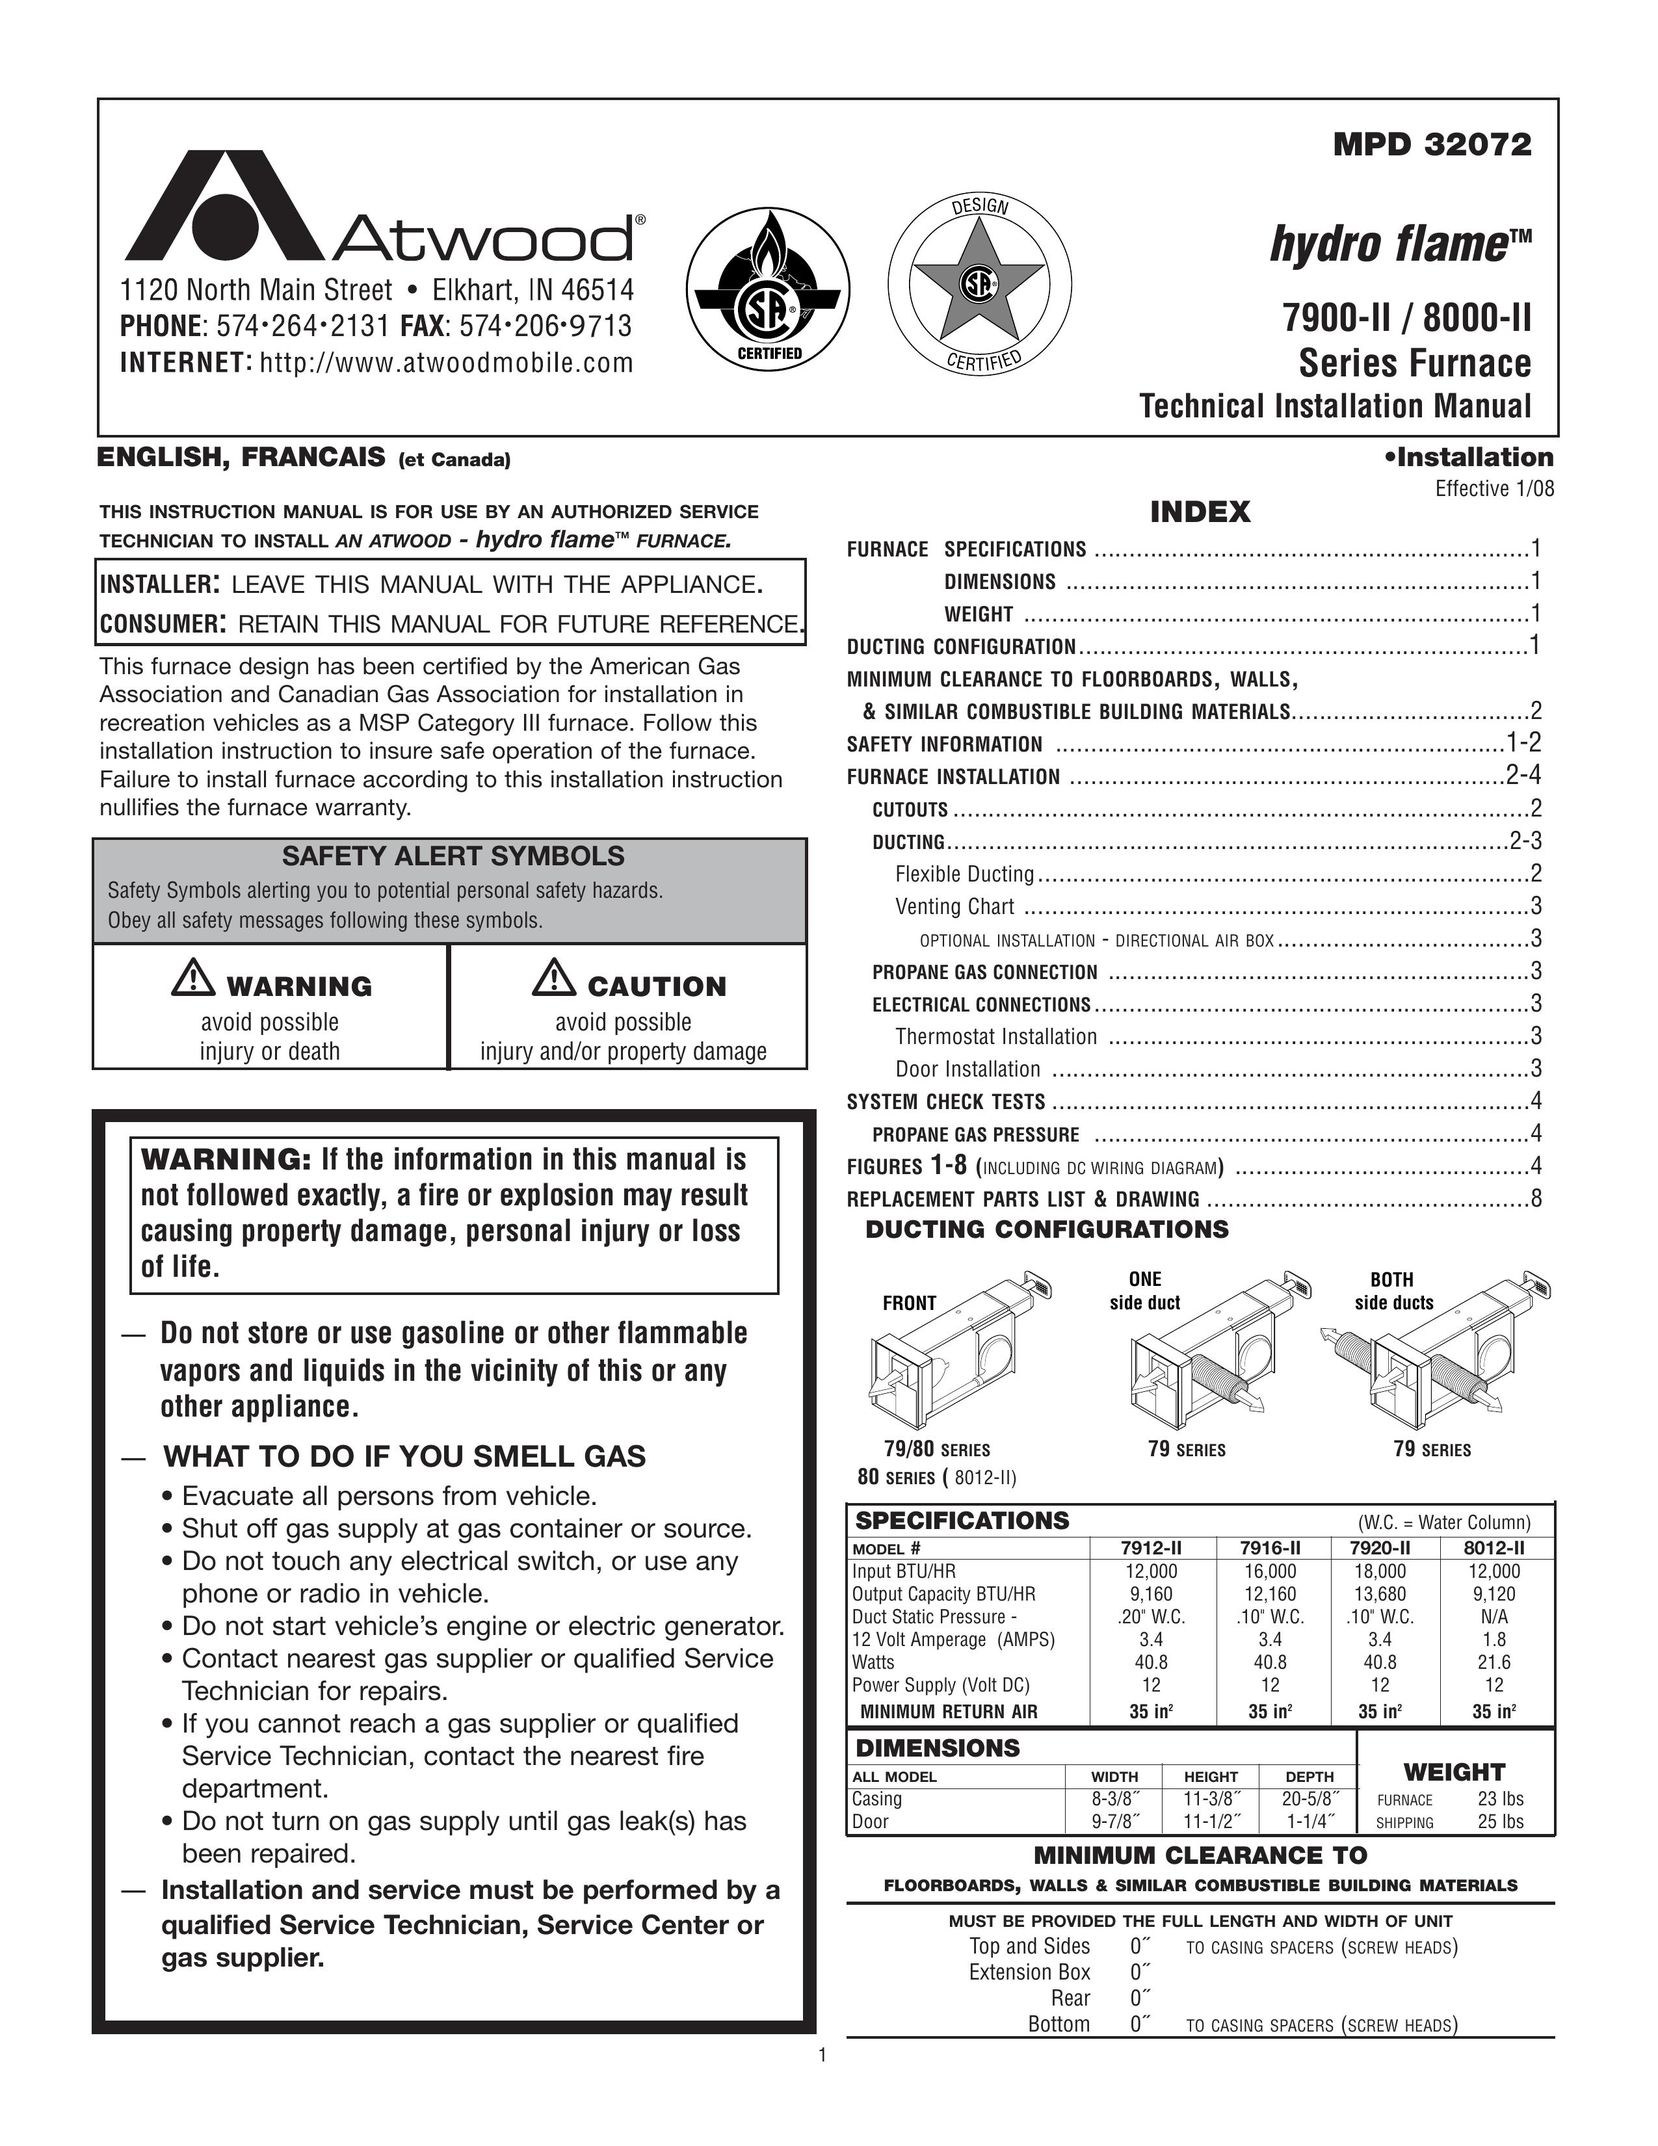 Atwood Mobile Products 7920-II Furnace User Manual